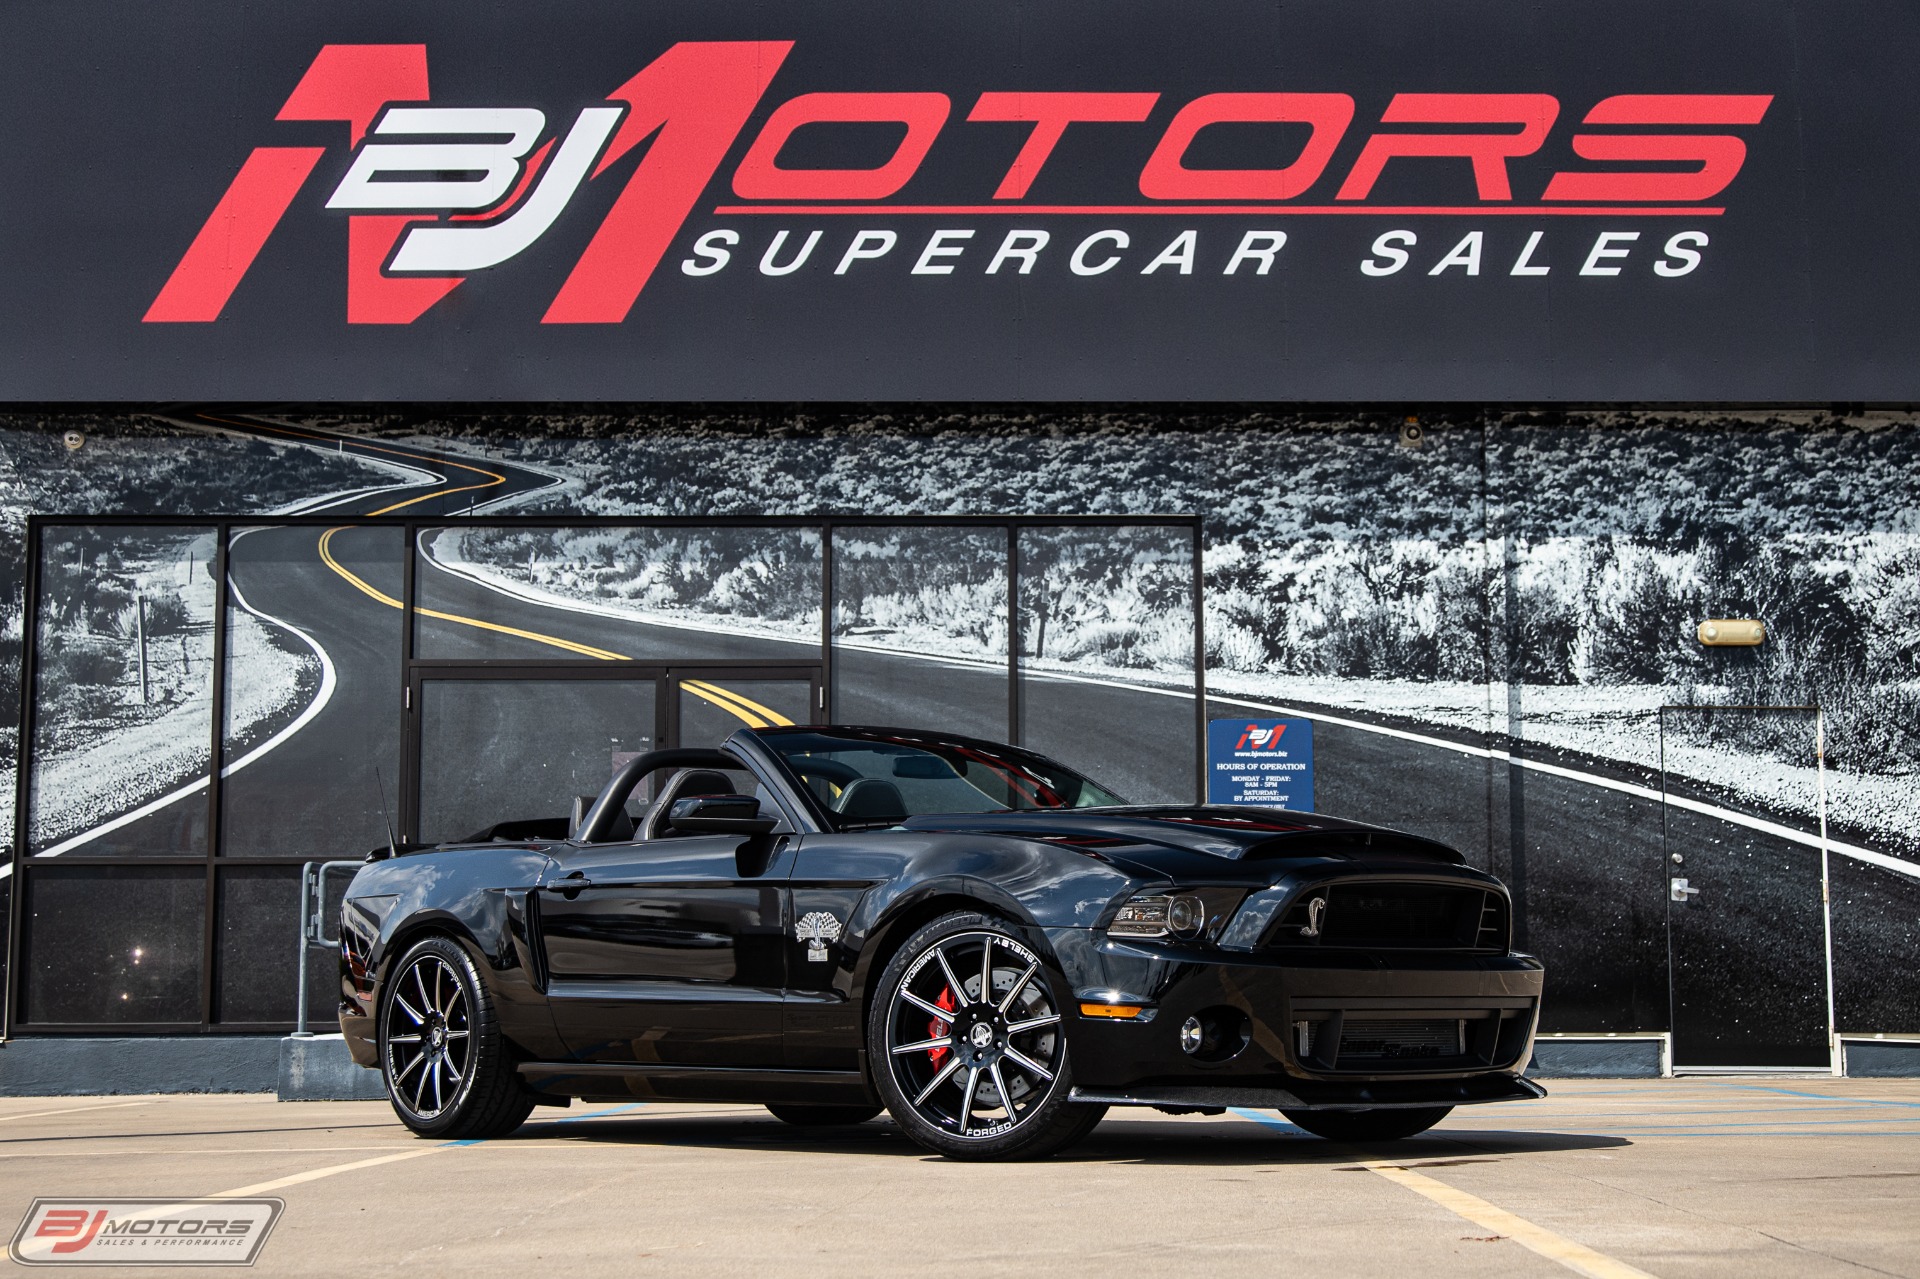 Used-2014-Ford-Mustang-Shelby-Super-Snake-Signature-Edition